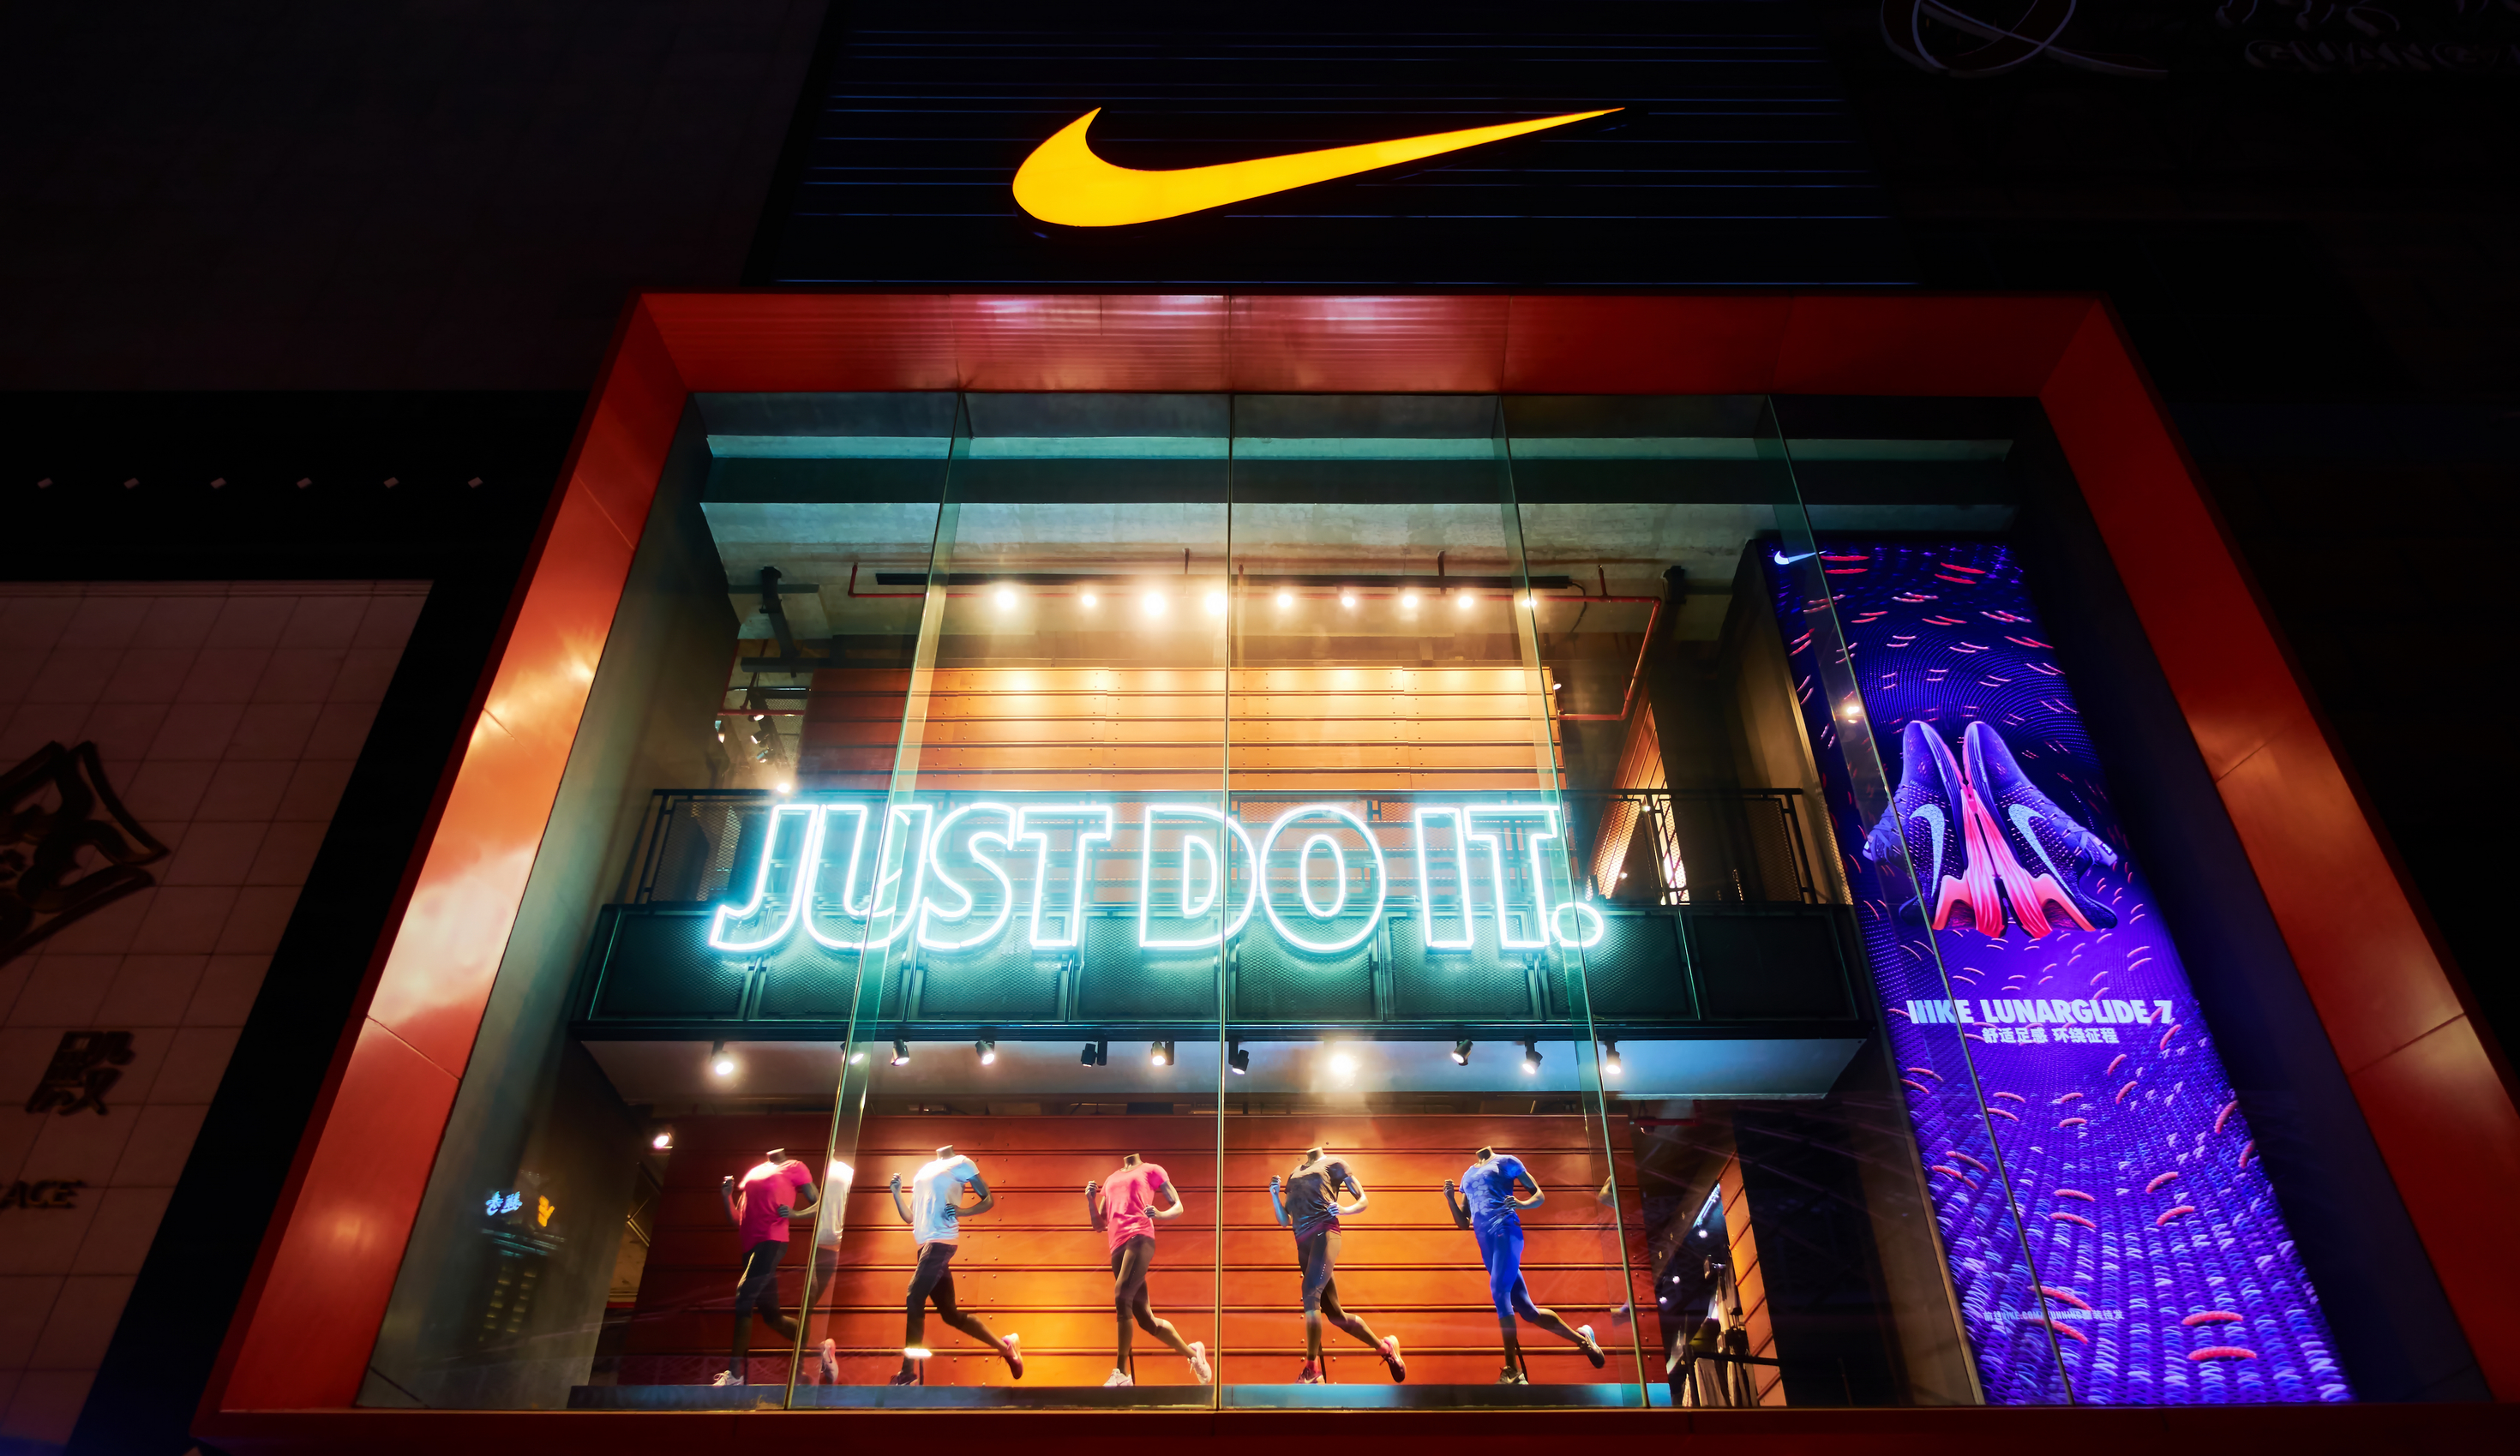 Nike promo codes: Take an extra 20% off select styles